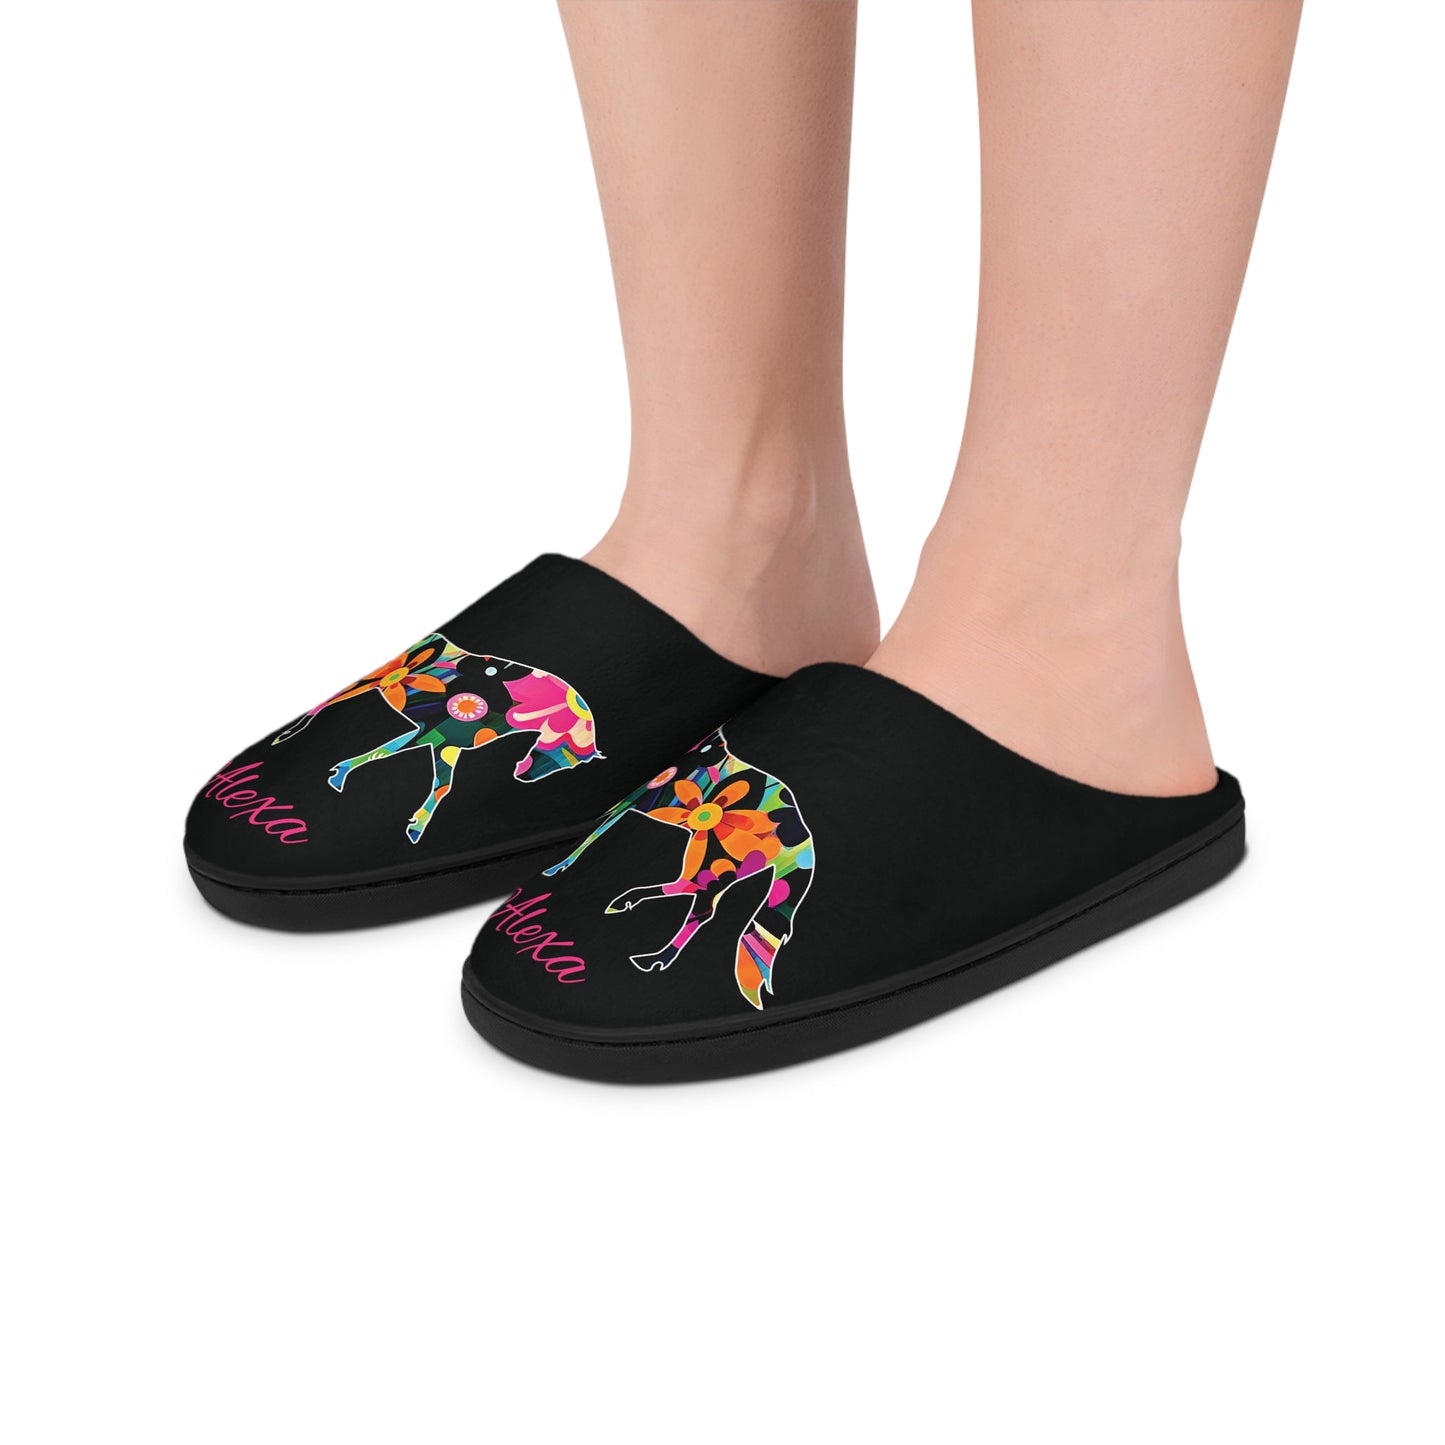 Personalized Floral Cut Out Horse on a Comfy Pair of Slip-On Slipper Scuffs - FlooredByArt